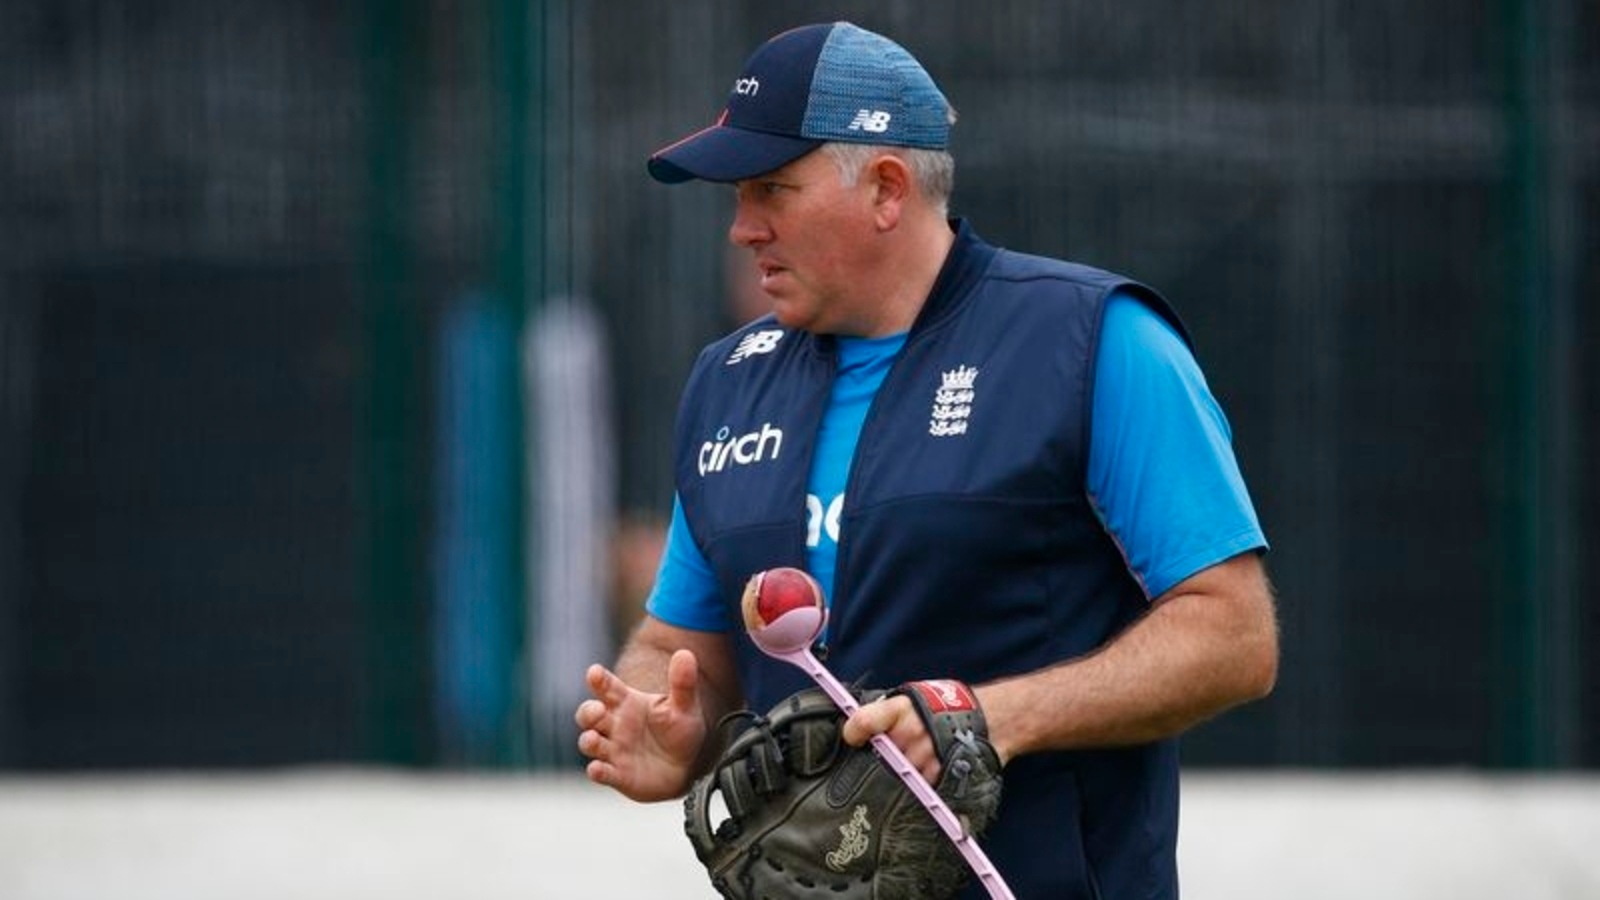 Will England coach Chris Silverwood make changes in winning team ahead of  2nd Test? here's what he said